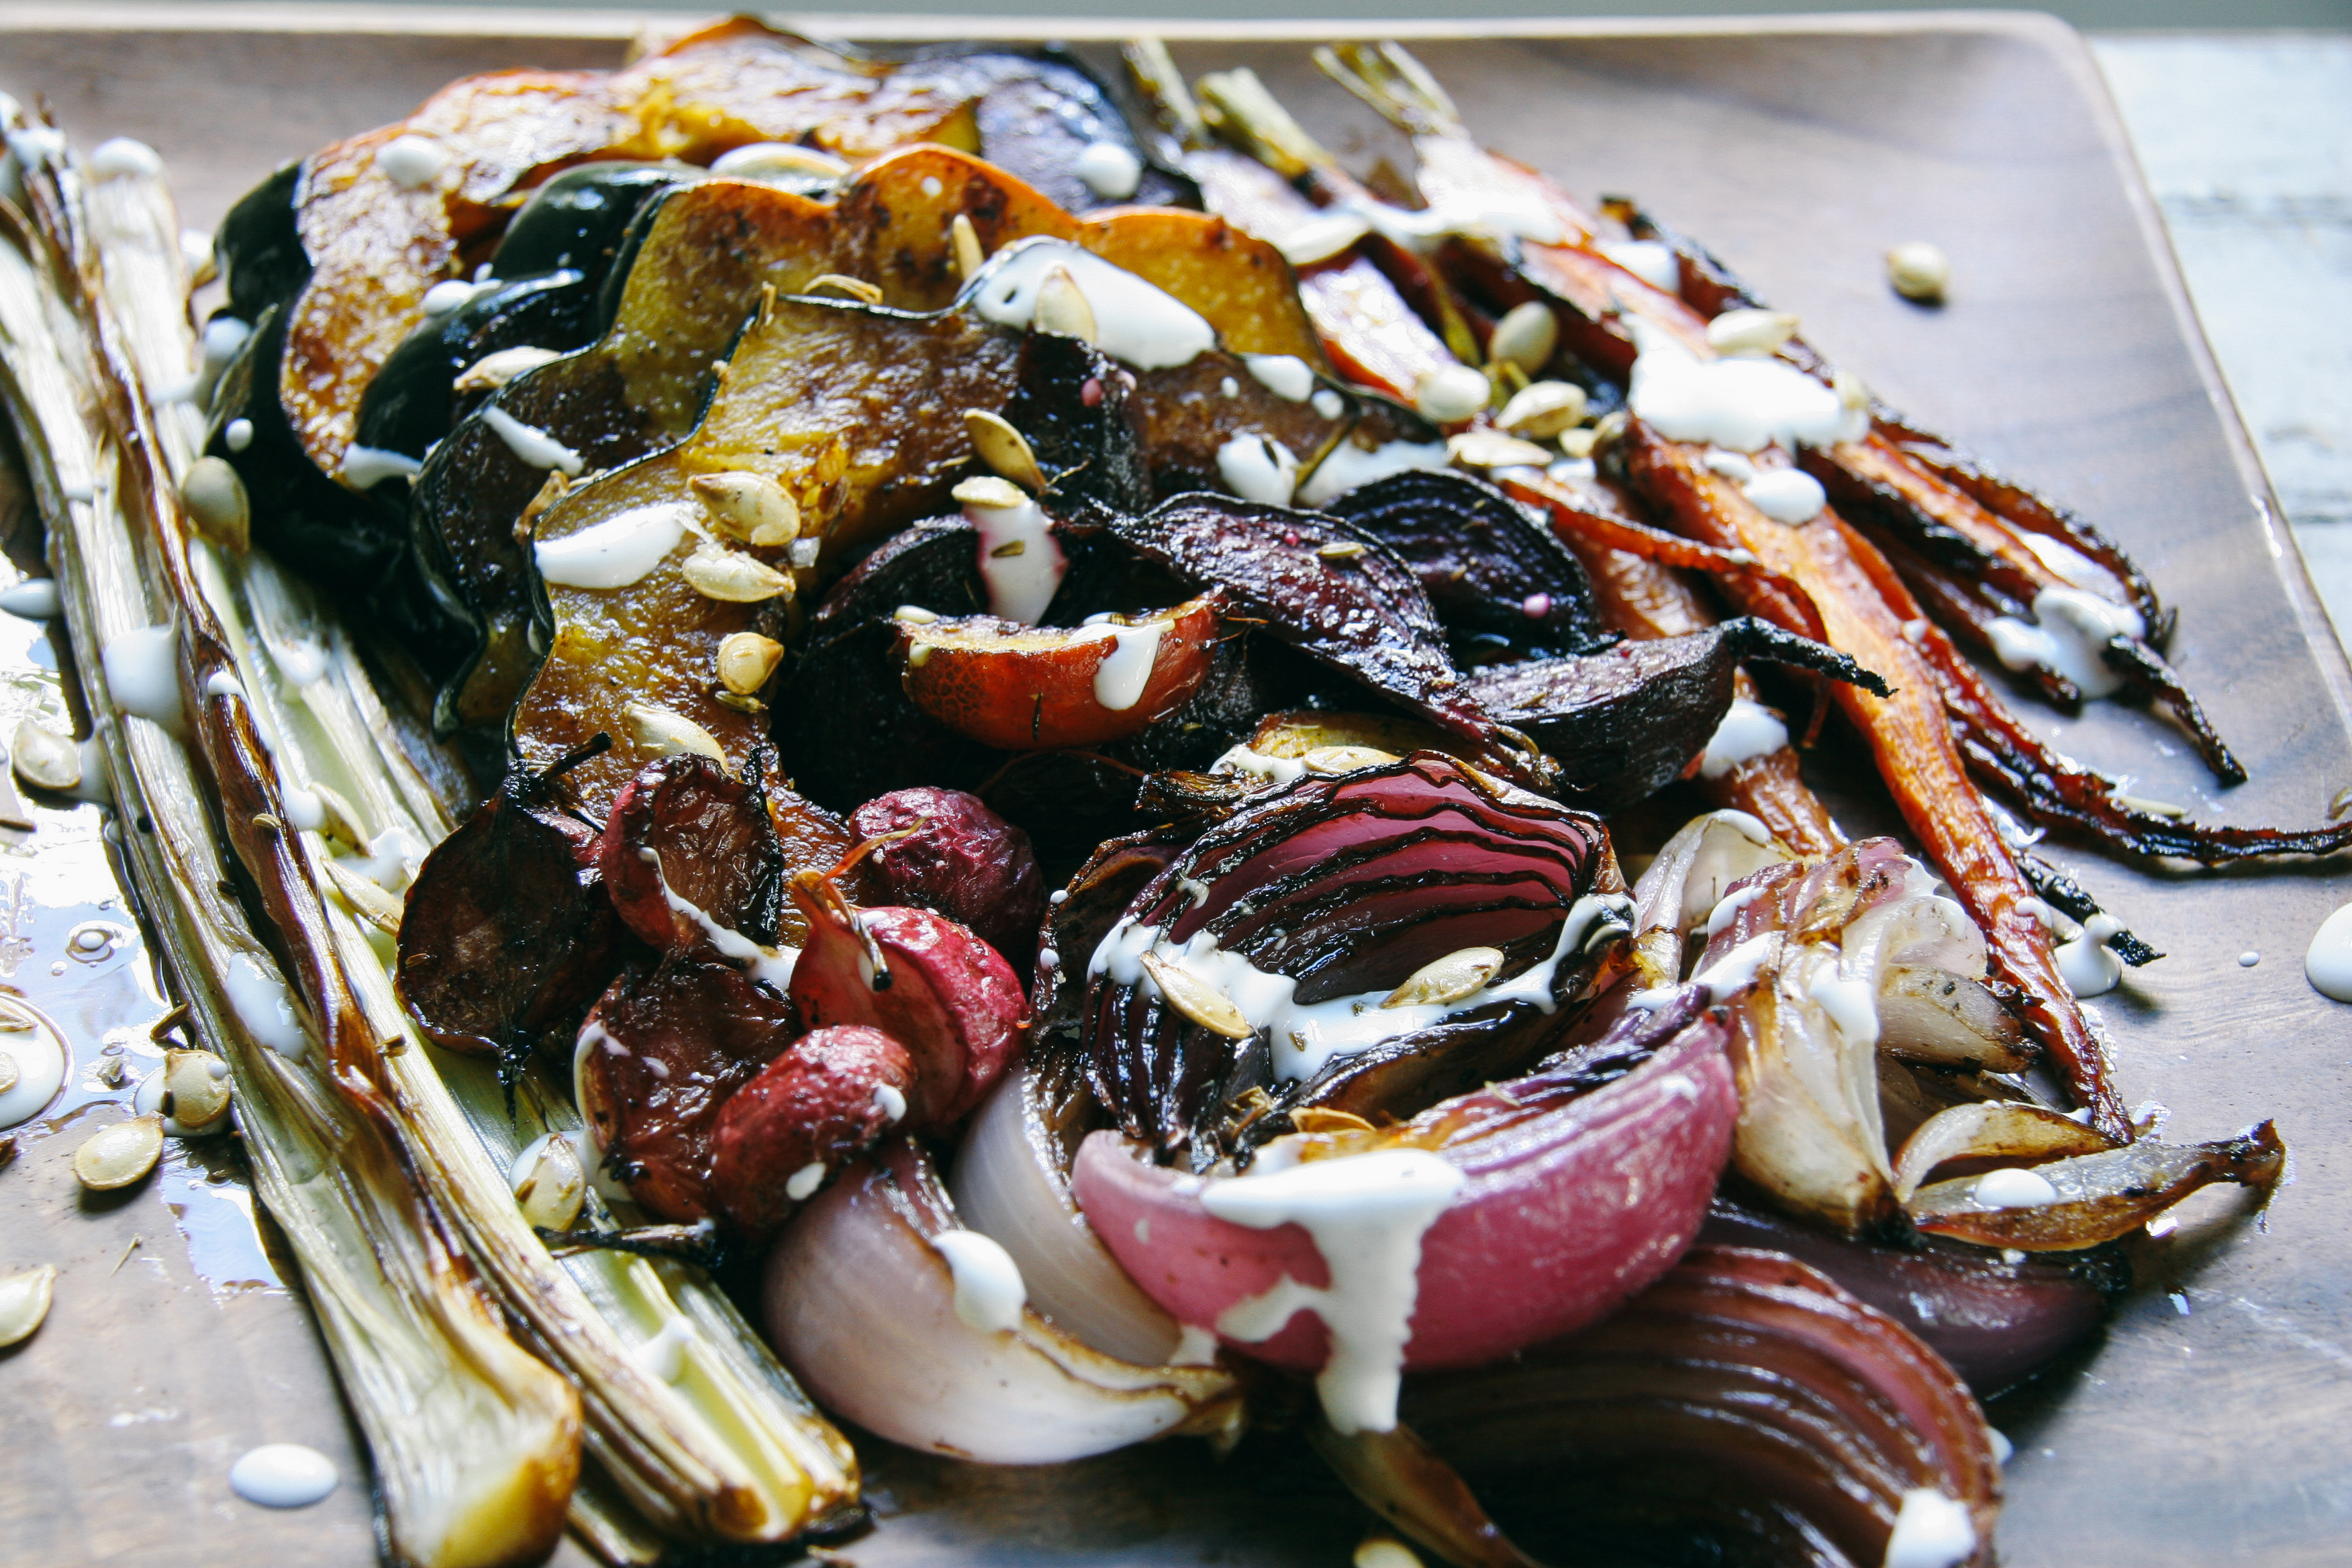 Fall Vegetable Roast with Fennel Squash Seeds & Sour Cream Sauce |I Will Not Eat Oysters